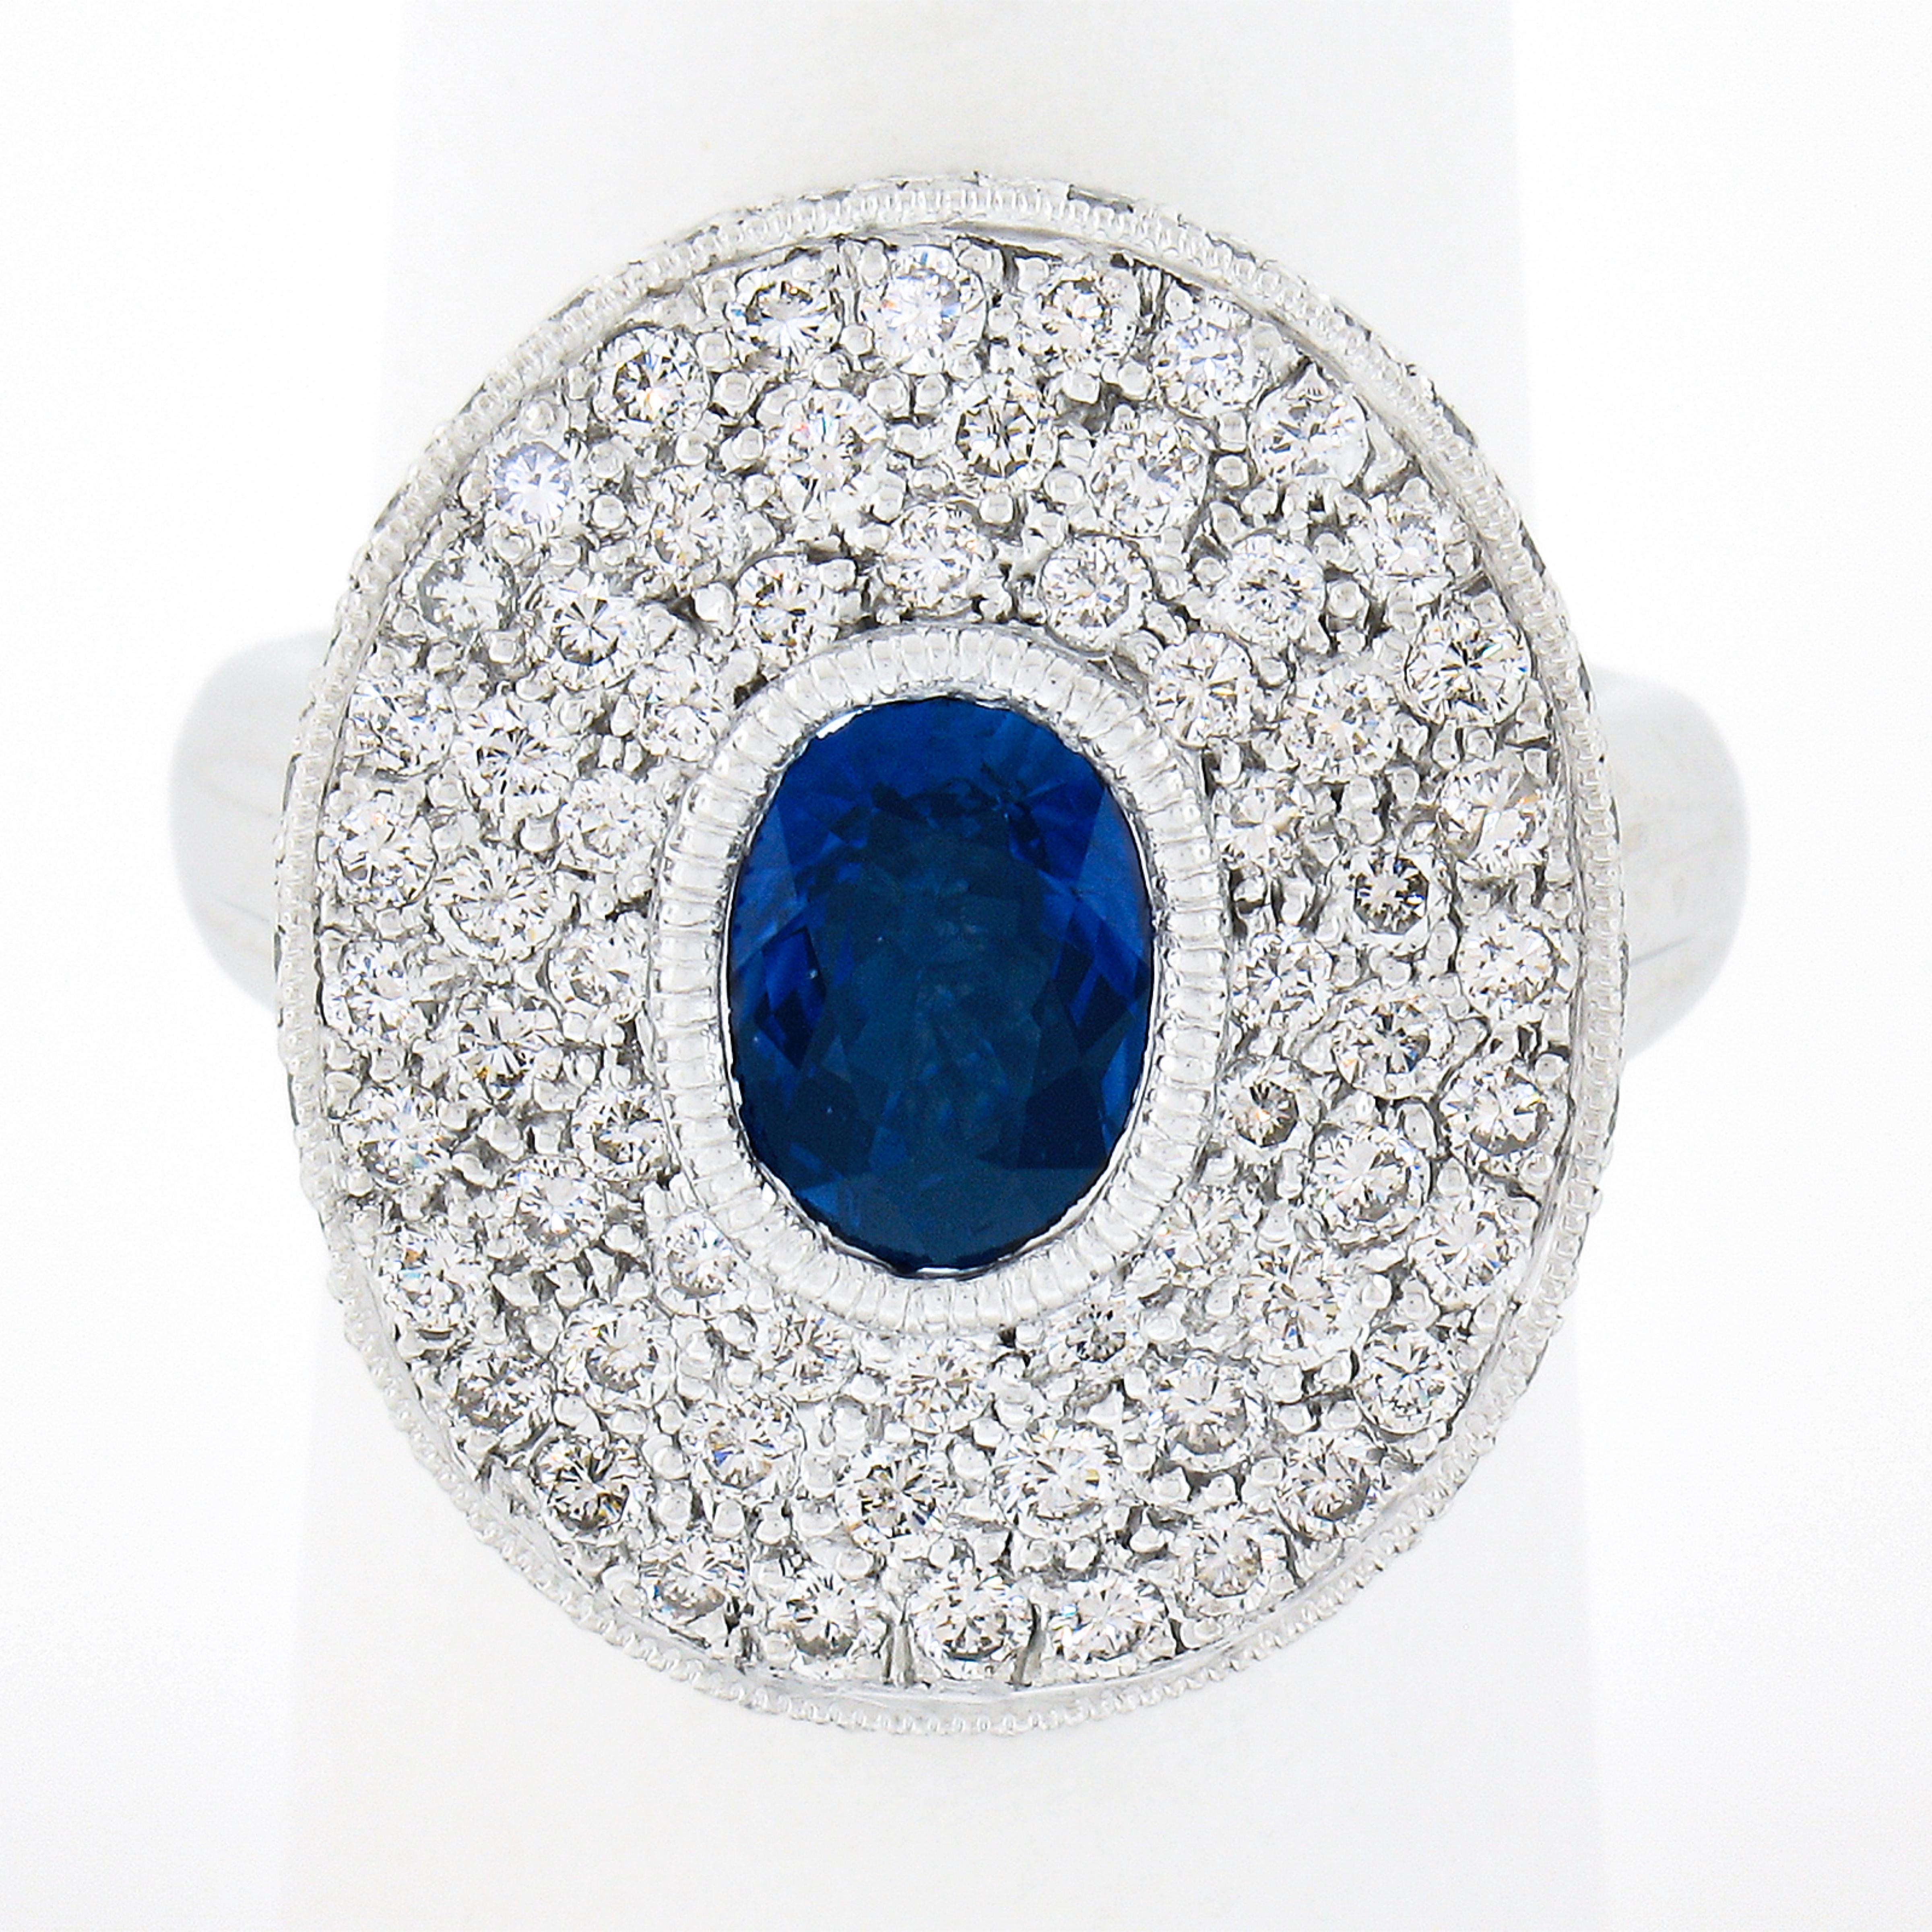 This magnificent and very well made cocktail ring is crafted in solid platinum, and features a large oval platter design that is completely covered with incredible pave work and set with the finest quality sapphire and diamonds throughout. The